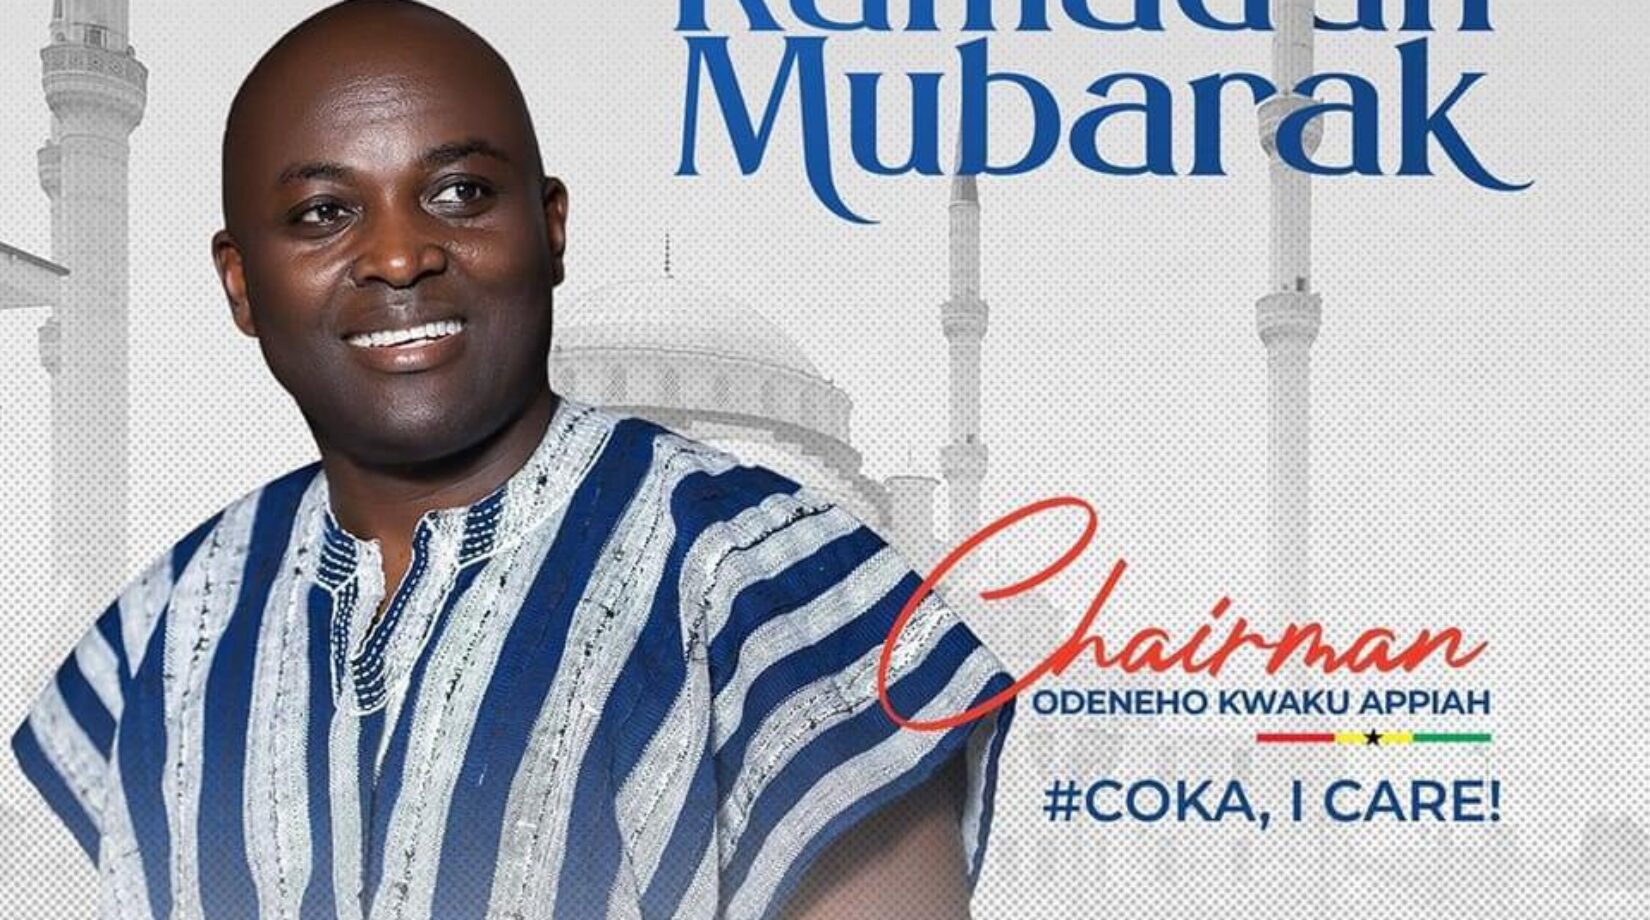 Pray for God’s favor, unity and his protection for Ghana-COKA urges Muslims